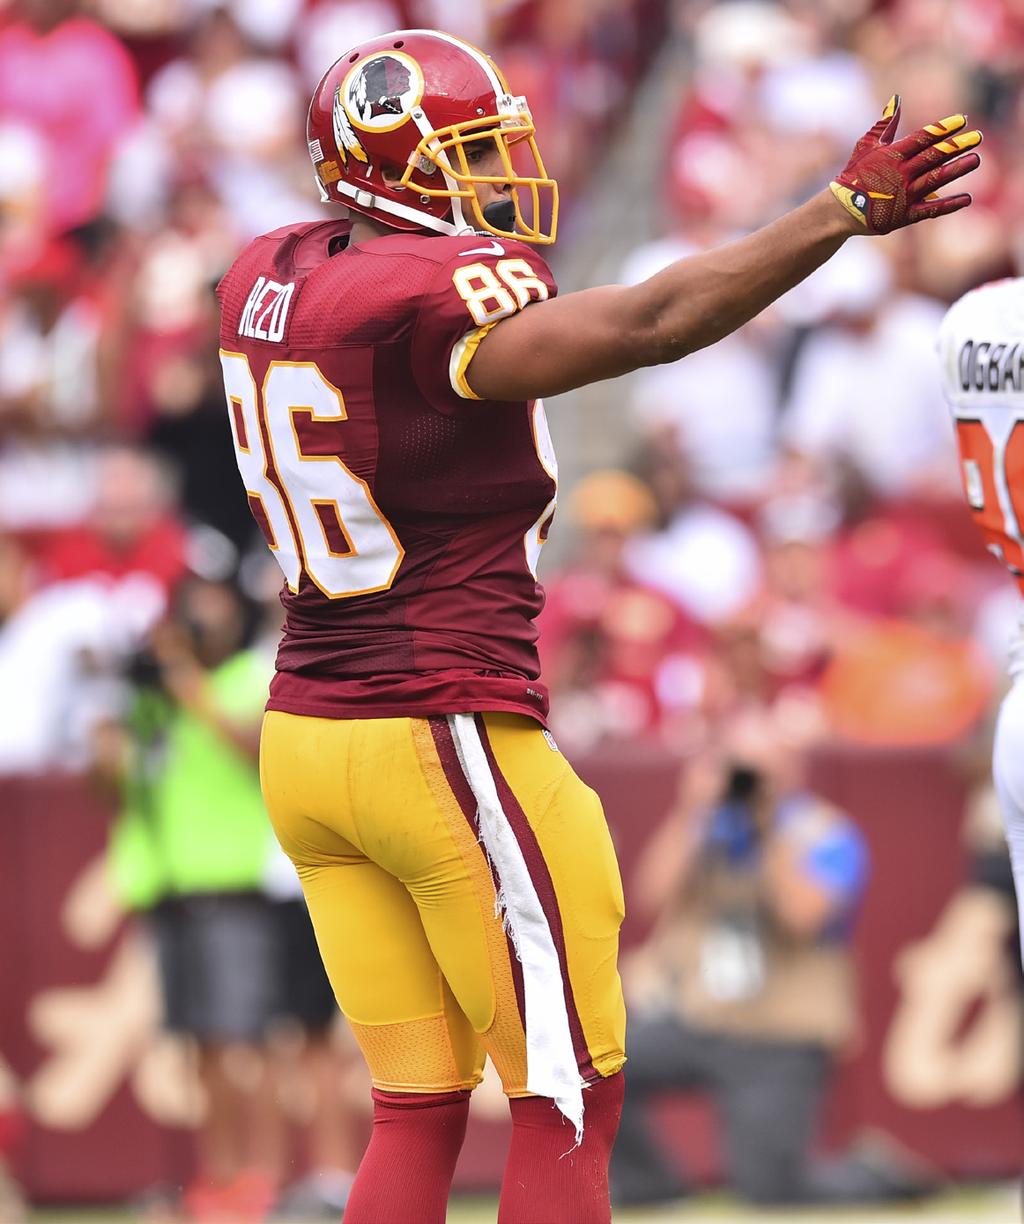 GAME RELEASE Early in his career, Jordan Reed flashed his talent, but a myriad of injuries and other factors limited his productivity in his first two NFL seasons from 2013-14.